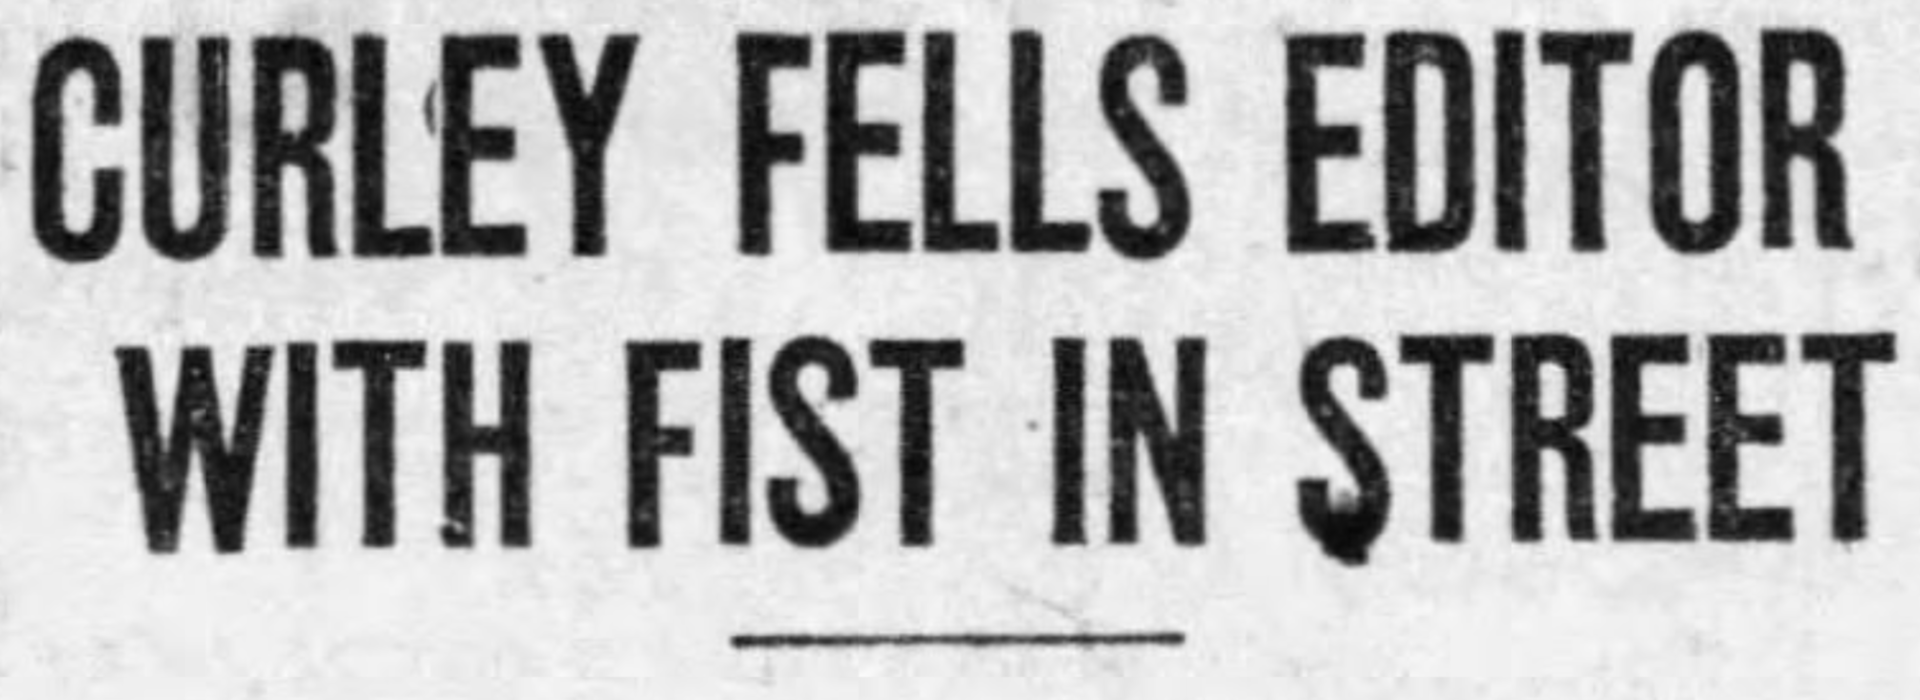 Mayor James MichaMayor James Michael Curley's scuffle with as newspaper publisher was front page news for The Boston Daily Globe in 1926. (Screenshot)rl Curley's scuffle with as newspaper publisher was front page news for The Boston Daily Globe in 1926. (Screenshot)